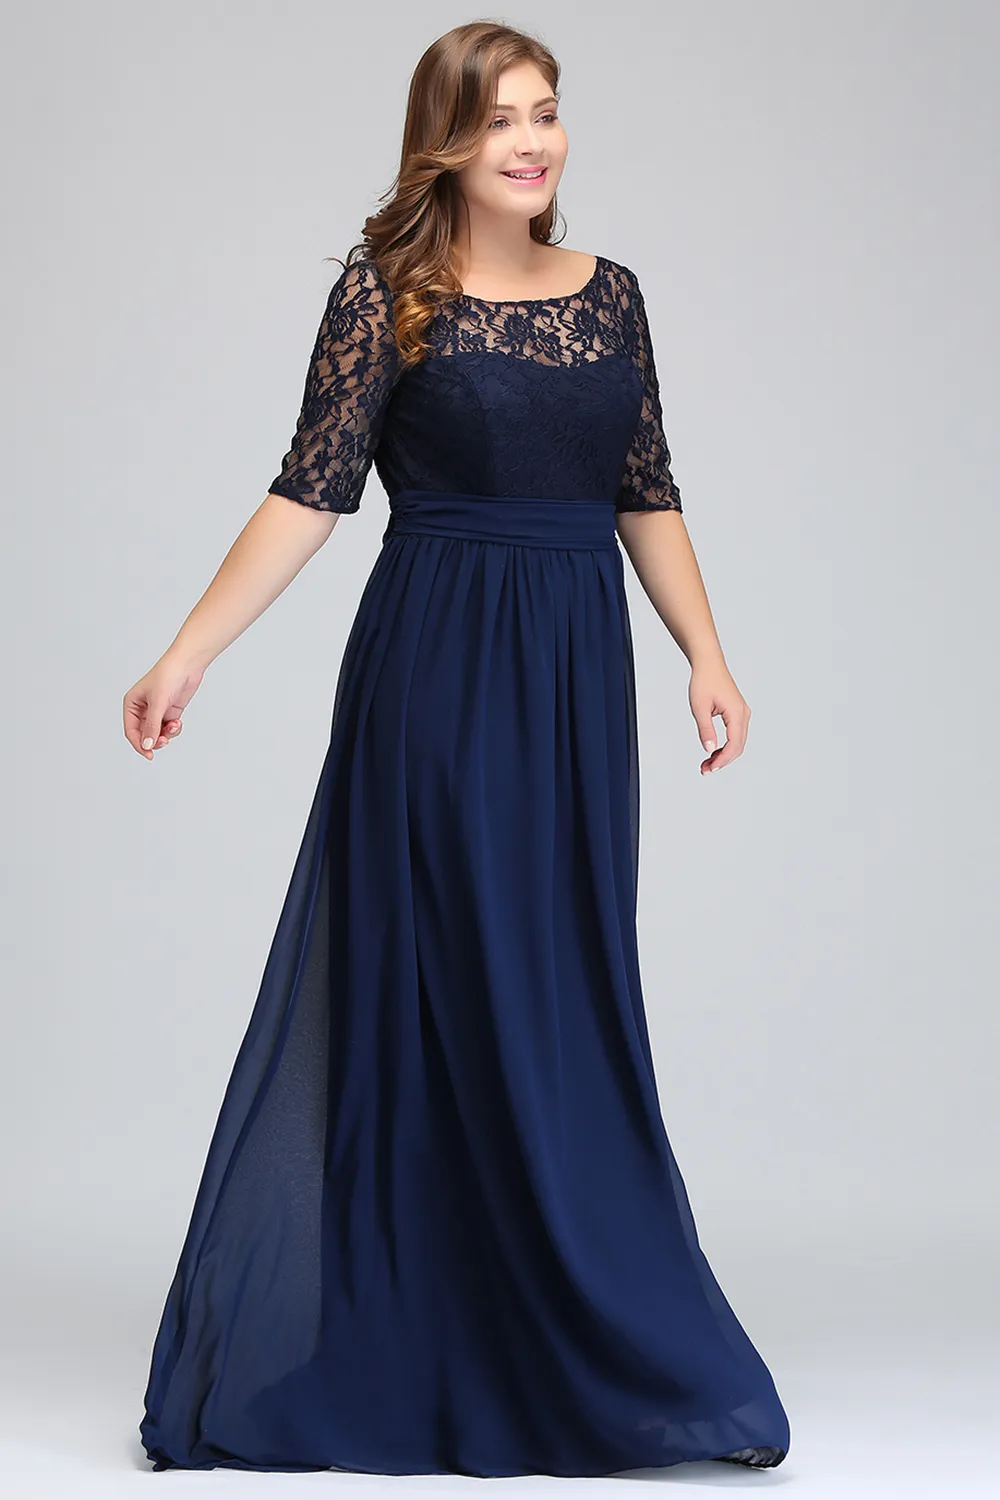 Dark Navy Black Burgundy Half Long Sleeves Plus Size Prom Dresses Lace Top A Line Chiffon V Back Mother of Bride Dresses Cheap Gowns CP 304E